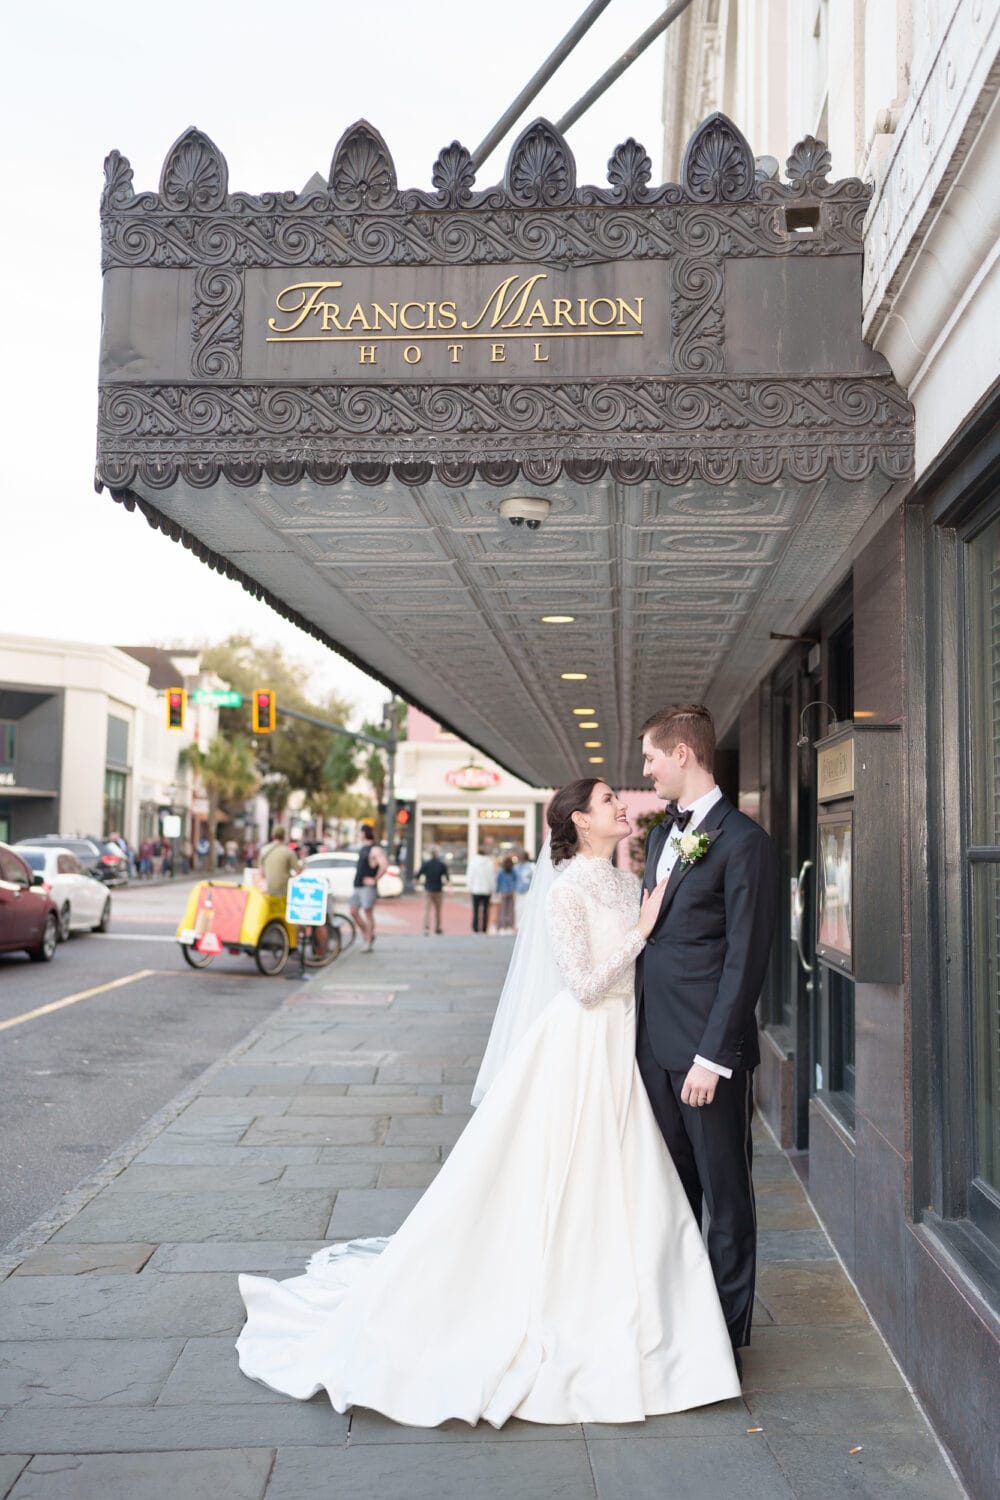 Bride and groom kissing under the Francis Marion hotel awning - Francis Marion Charleston